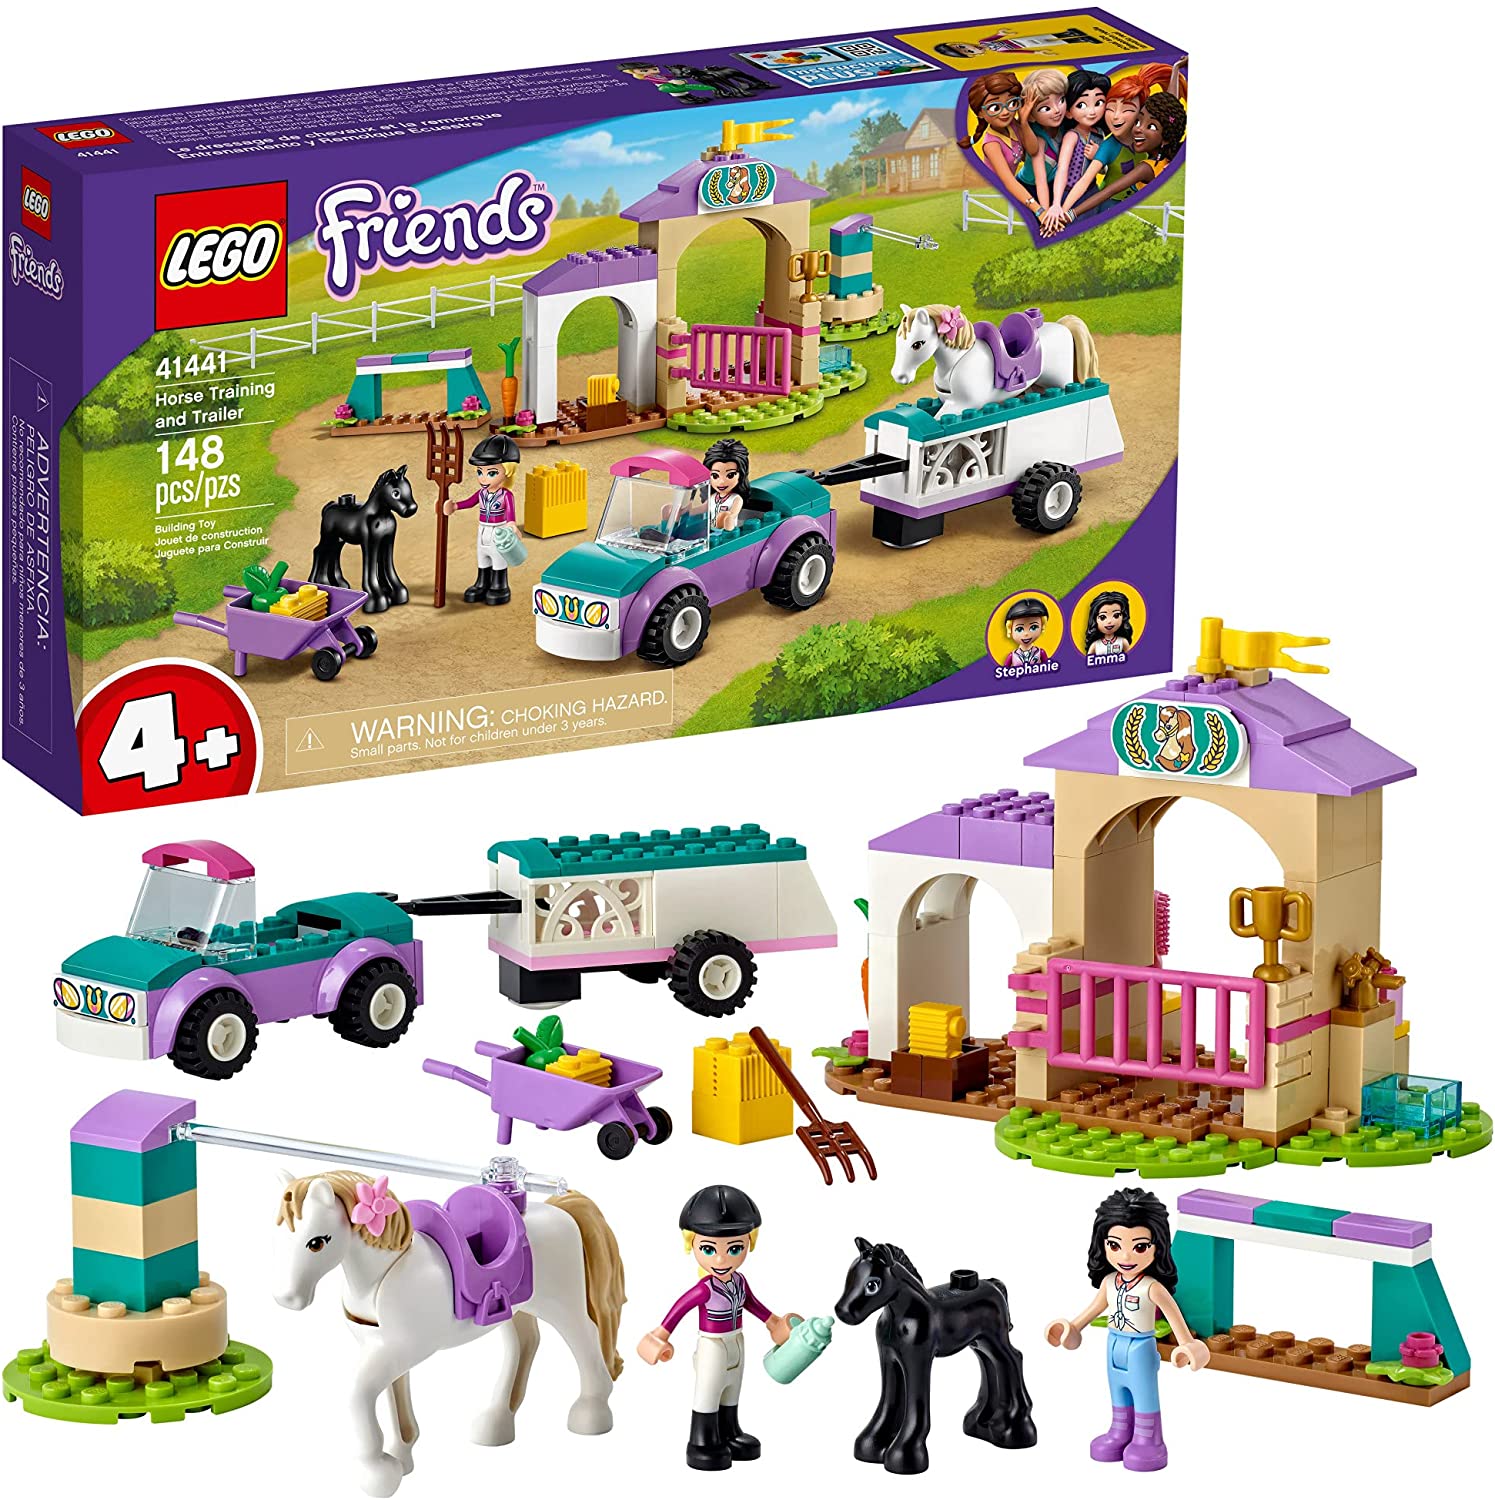 148 Pc. LEGO Friends Horse Training and Trailer 41441 $23.99 + Free Curbside Pickup